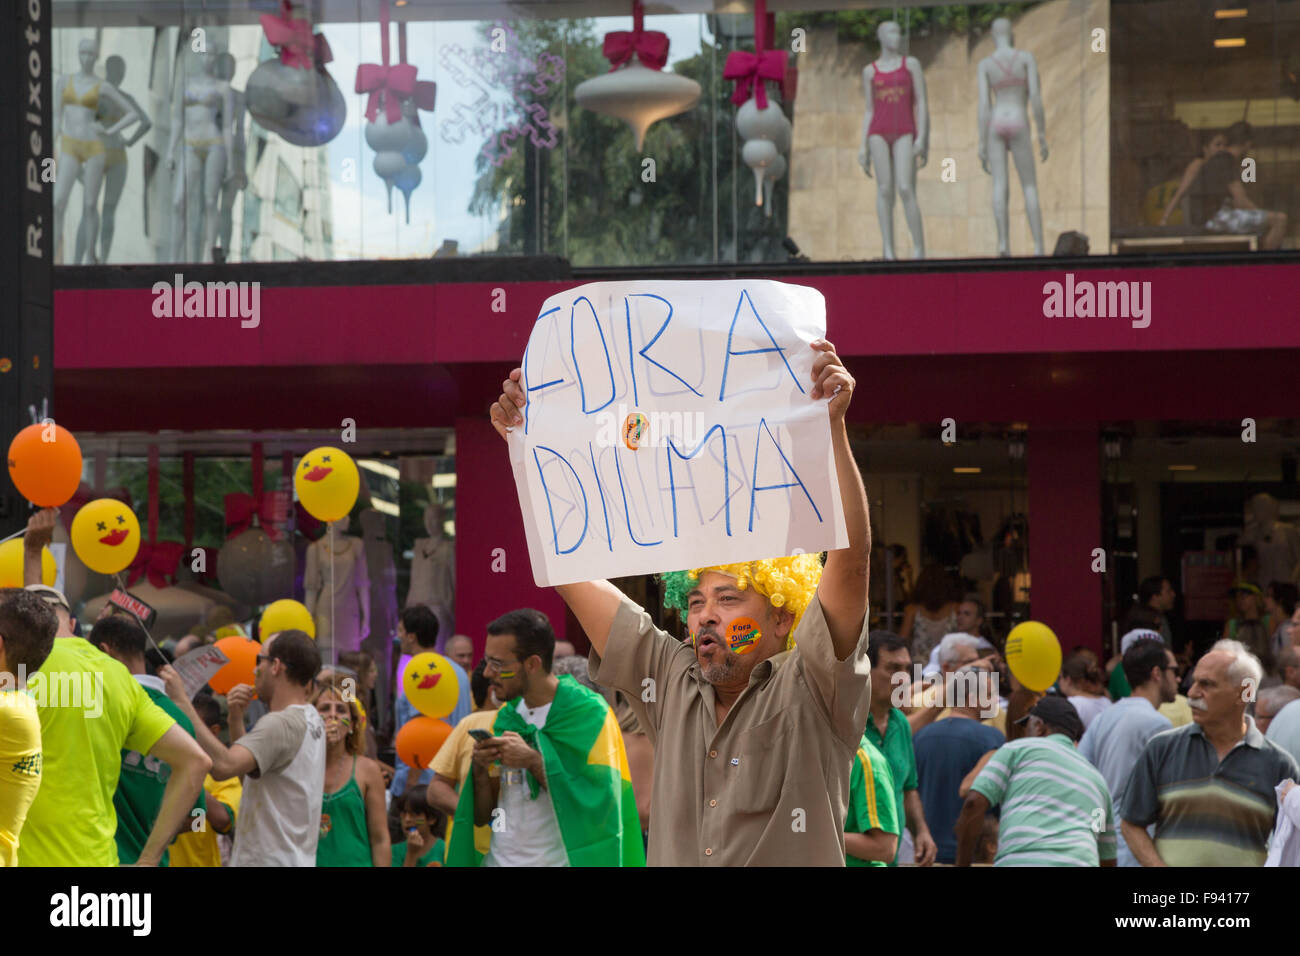 Sao Paulo, Brazil. 13th December, 2015. A demonstrator with poster written in Portuguese 'Fora Dilma' (in English 'Out Dilma') is seen during a demonstration calling for the impeachment of Brazil's President Dilma Rousseff in Paulista avenue, Sao Paulo, Brazil. Credit: Andre M. Chang/Alamy Live News Stock Photo